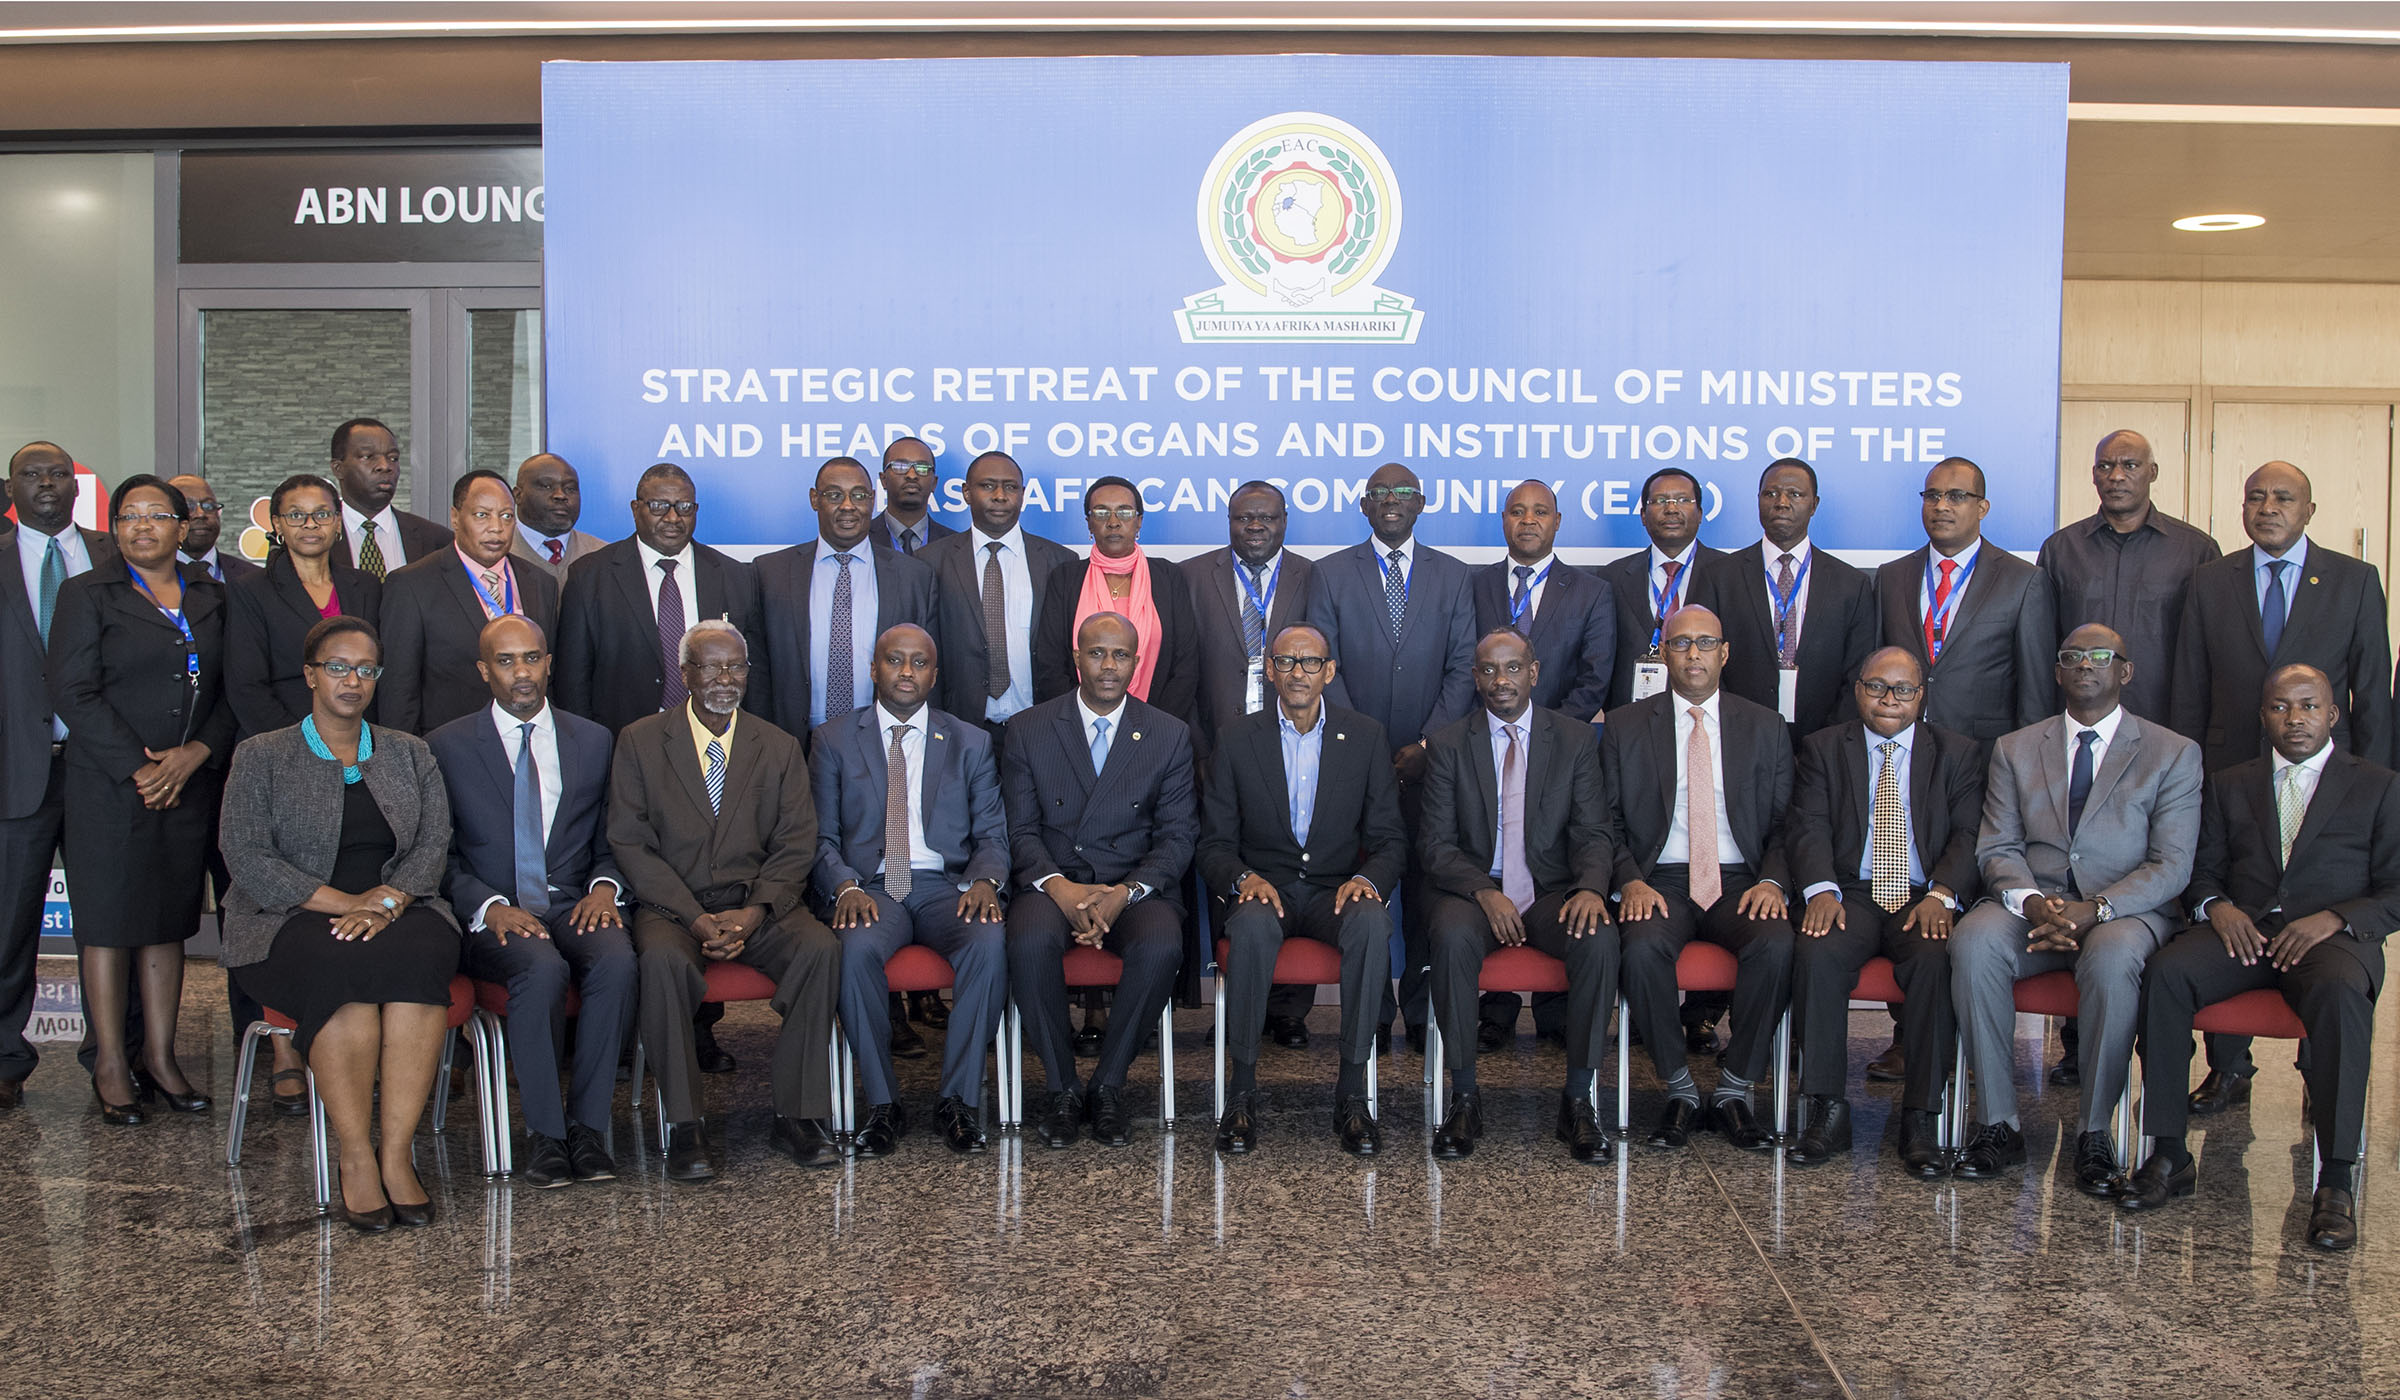 President Paul Kagame amidst regional officials after opening the strategic retreat of the Council of Ministers and Heads of Organs and Institutions of EAC in Kigali yesterday. The President is pushing for urgent fixing of the bloc's challenges. Village Urugwiro.